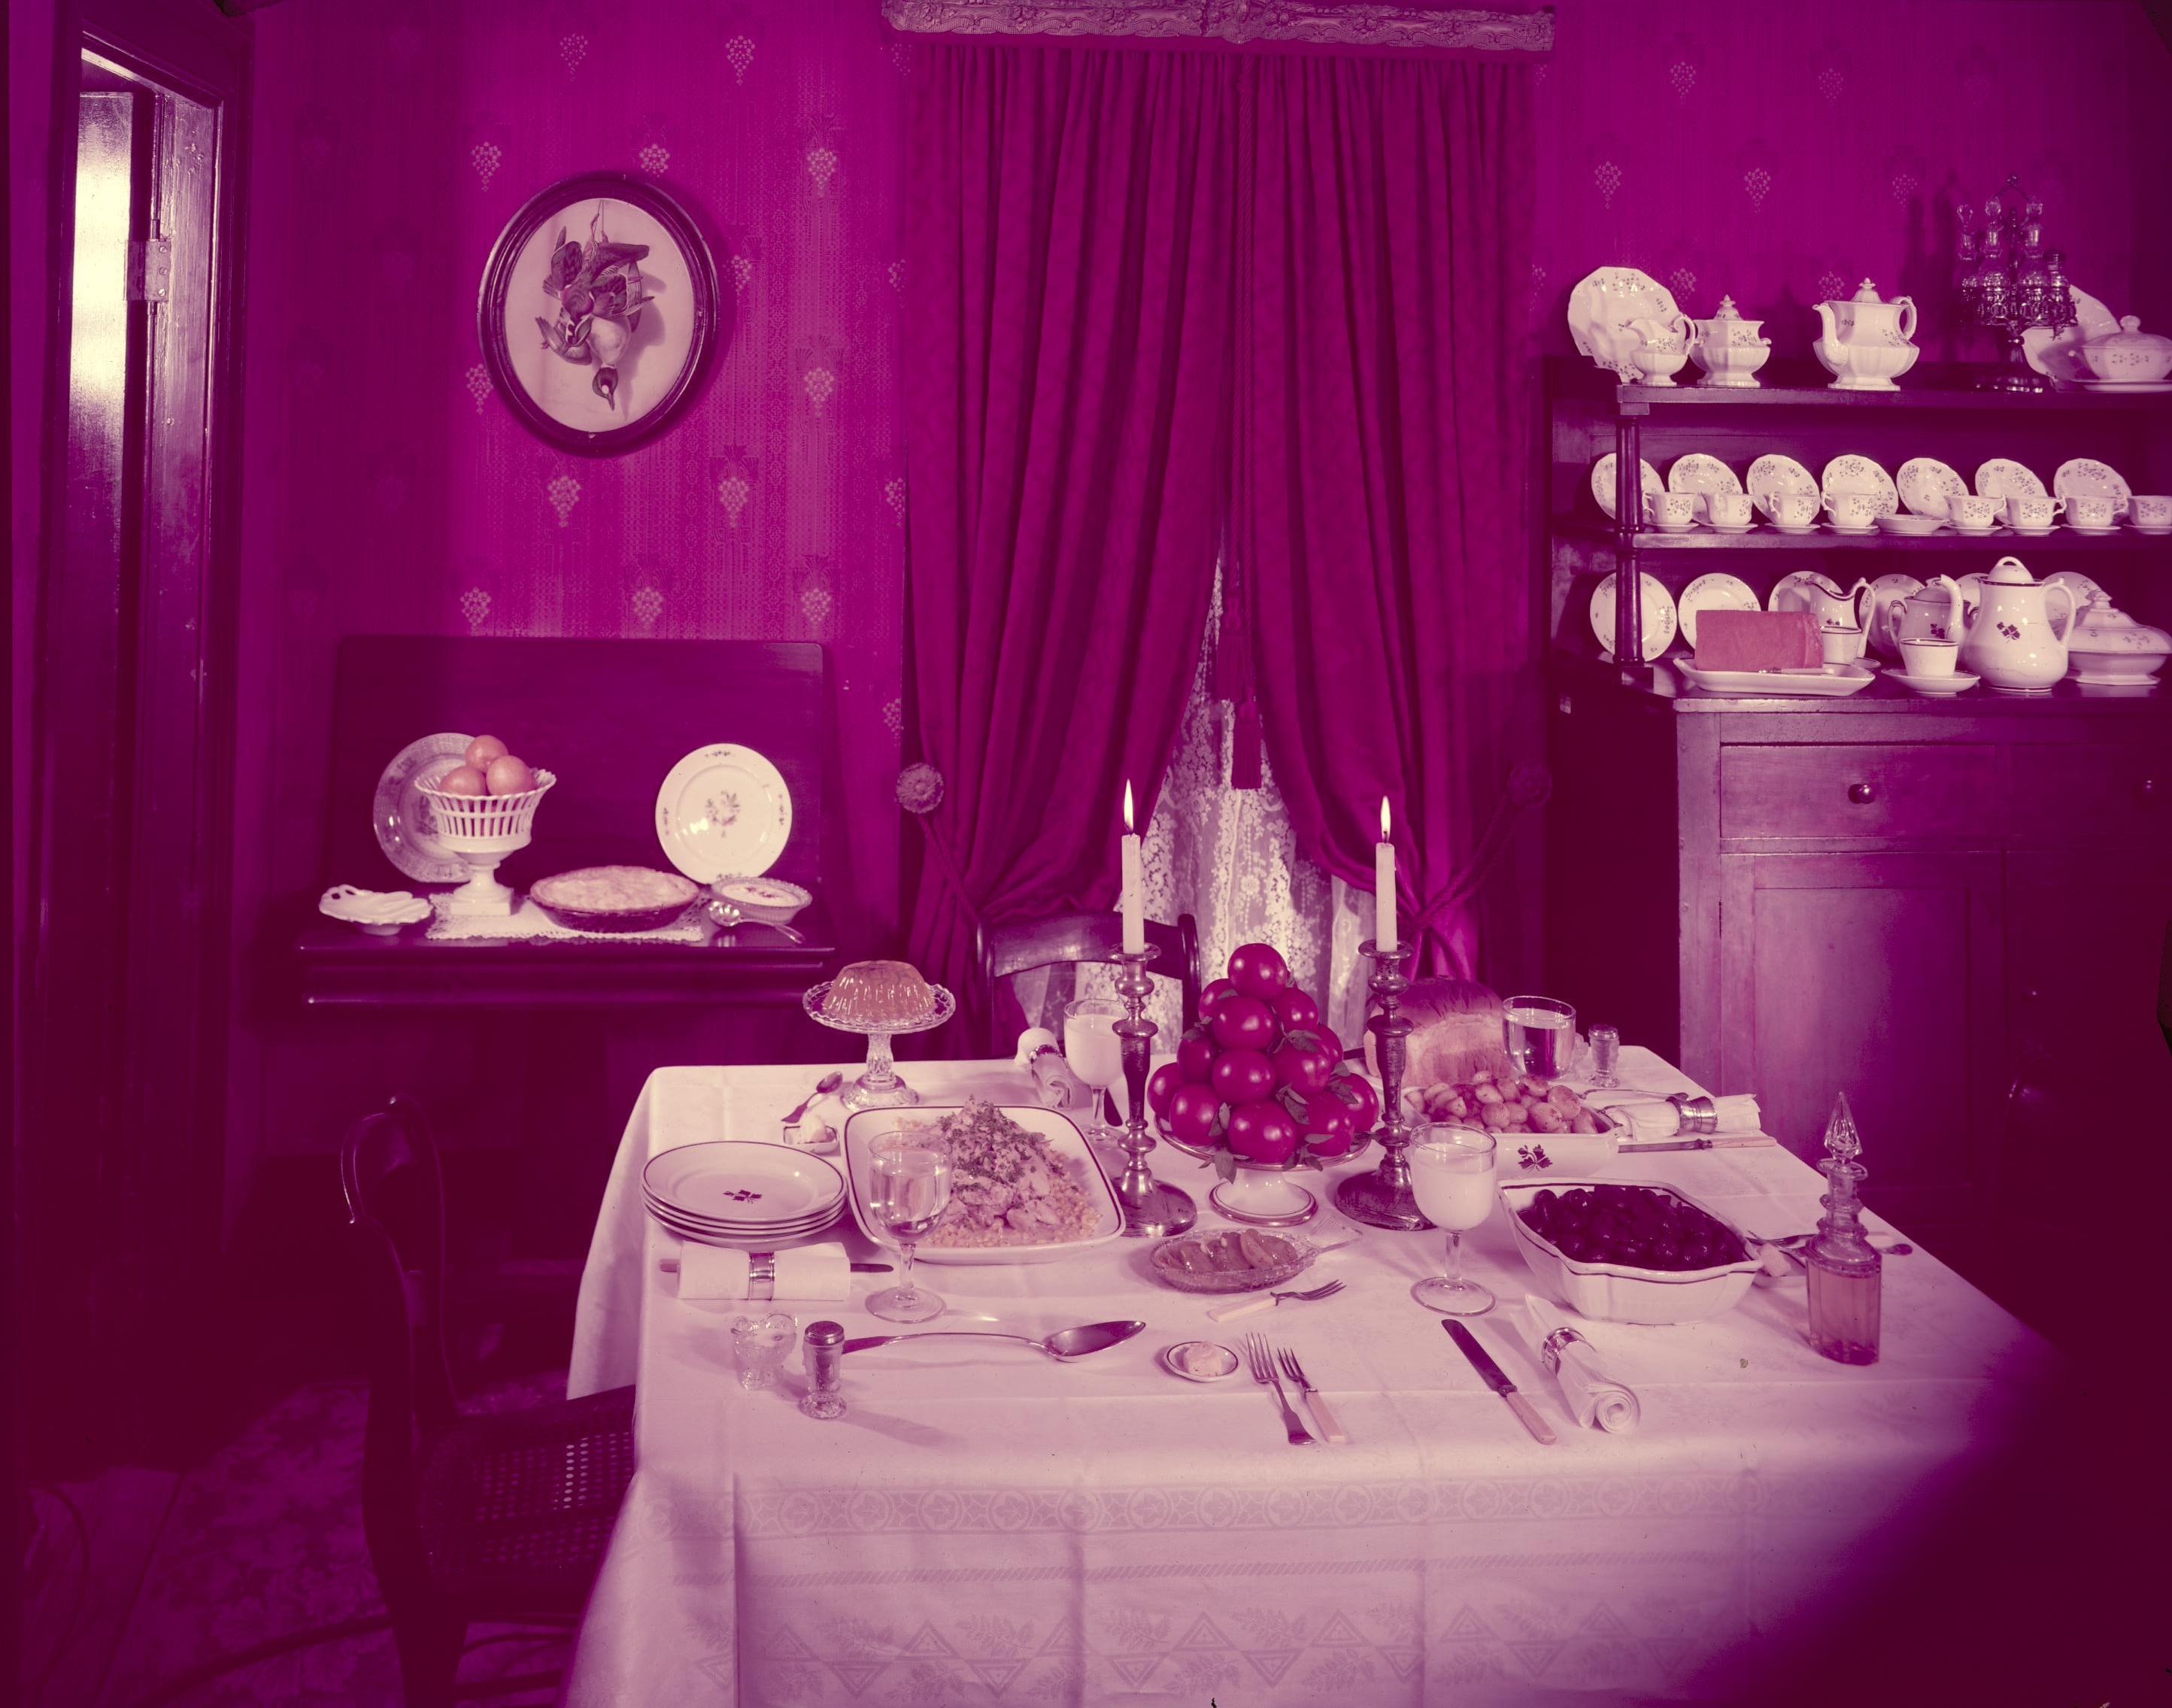 Dining room with table set for a formal meal. Lincoln Home NHS- McCalls pictures 1957, 8-11+, 11 Lincoln, McCalls, dining, furnishings